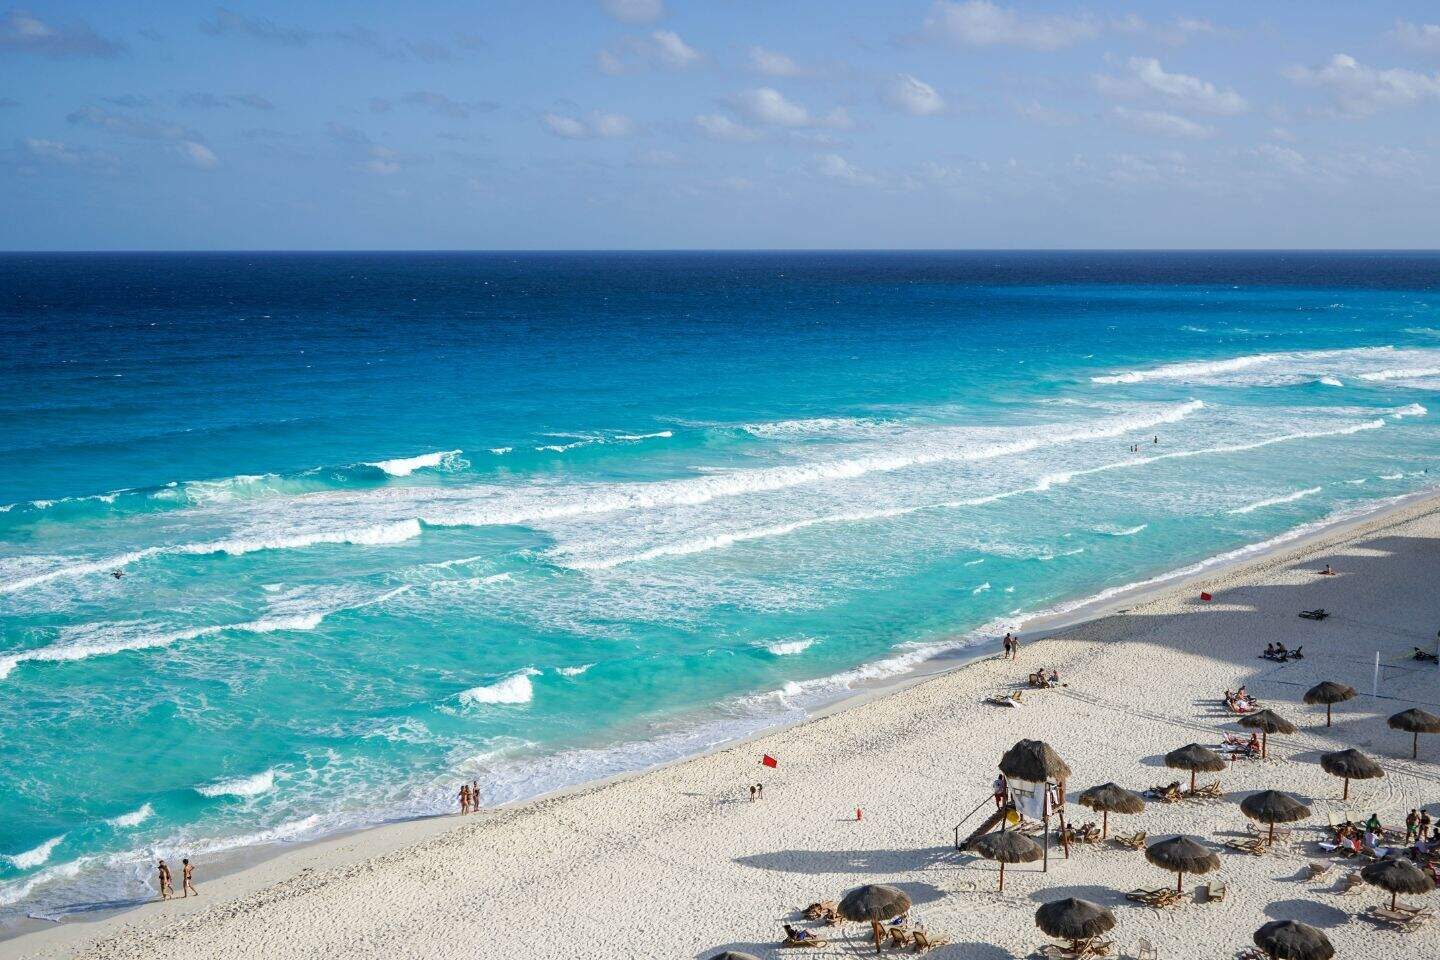 A view of ocean in Cancun, Mexico.